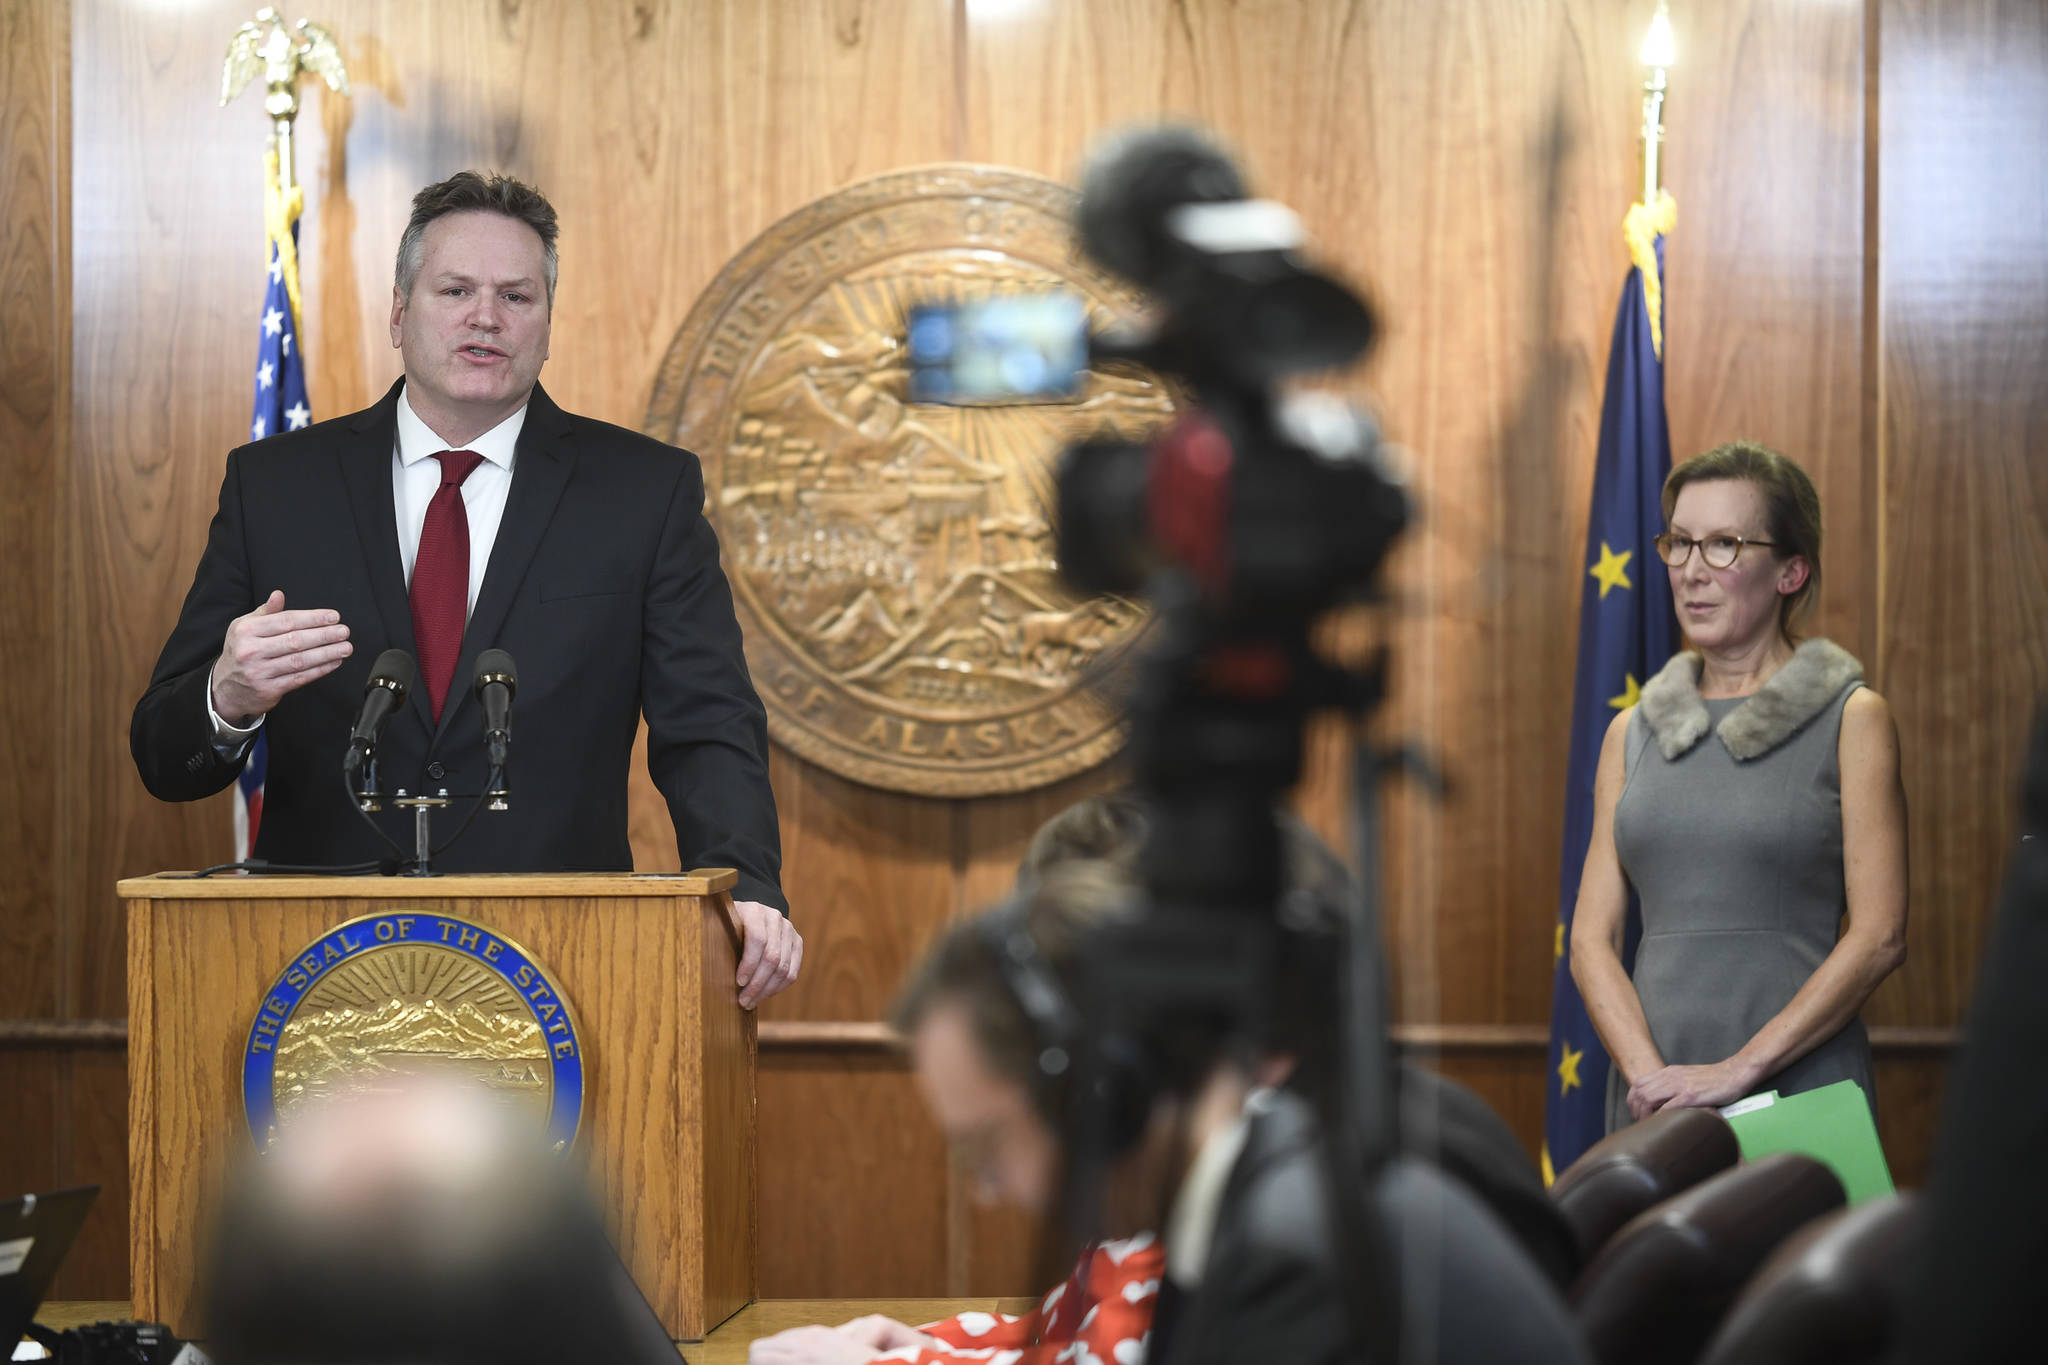 Office of Management and Budget Director Donna Arduin, right, listens to Gov. Mike Dunleavy announce his state budget during a press conference on Wednesday, Feb. 13, 2019. (Michael Penn | Juneau Empire)